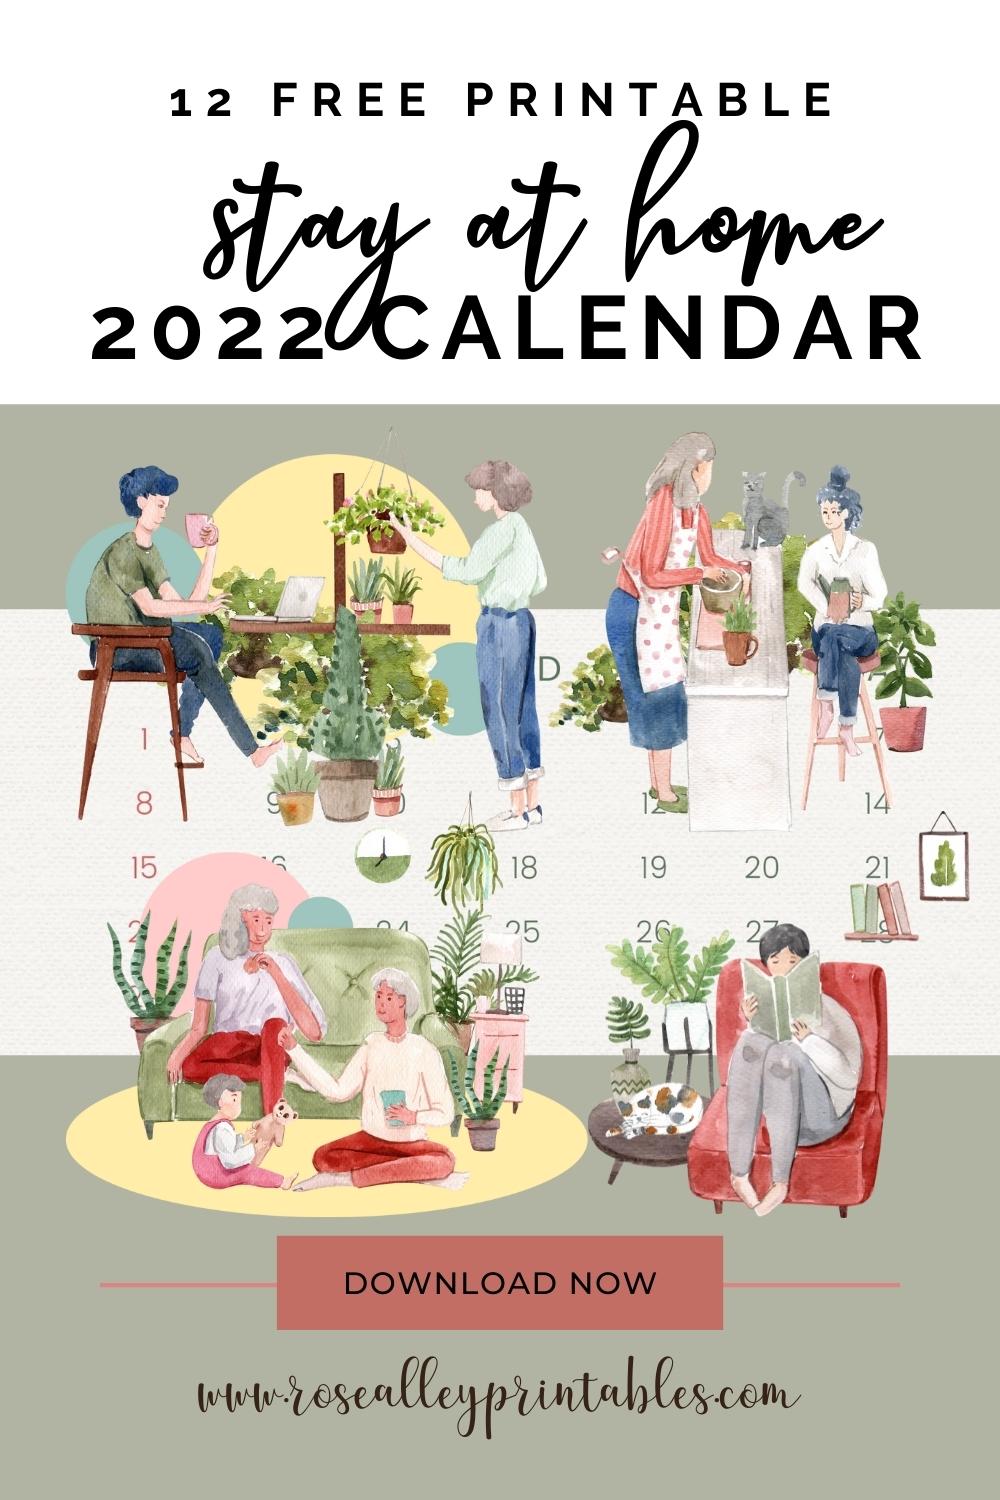 12 Free Printable Stay At Home 2022 Calendar